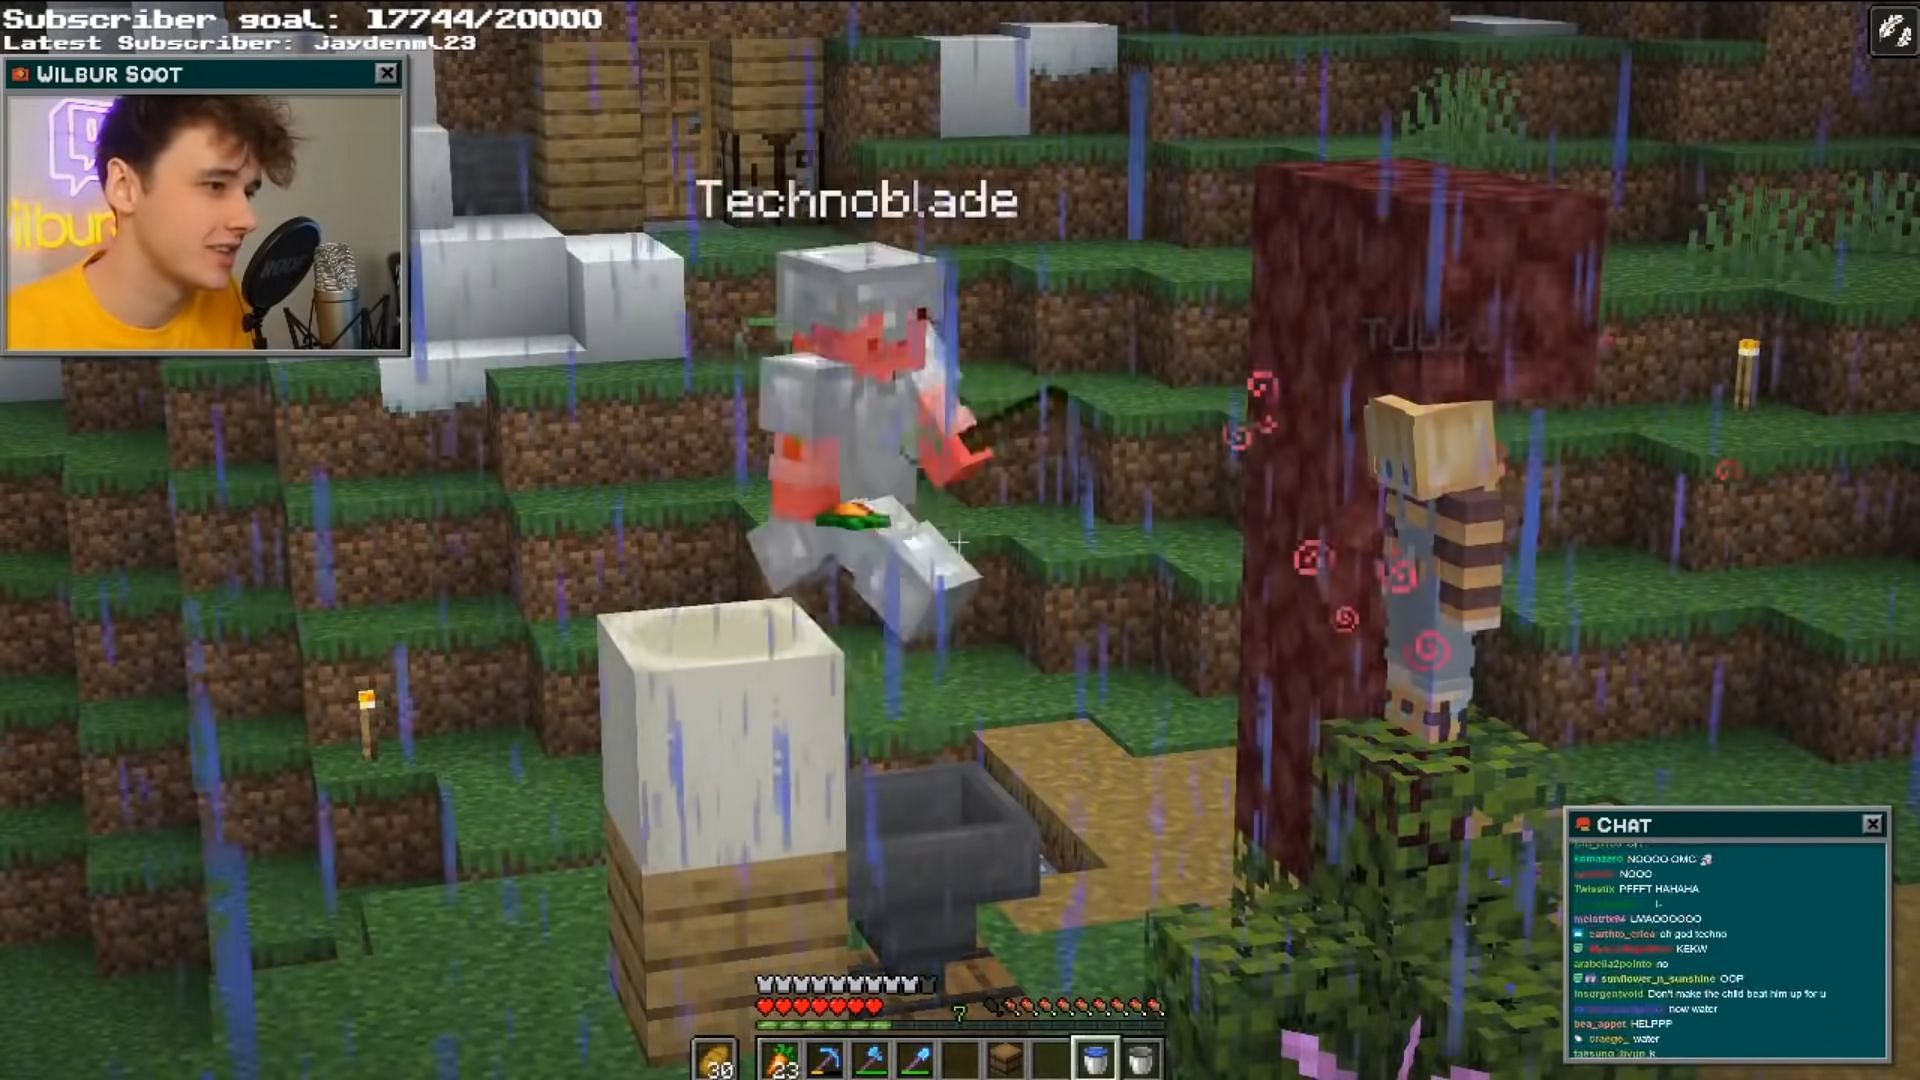 Wilbur Soot and Tubbo farming rabbit&#039;s foot from Technoblade (Image via Canooon YouTube)